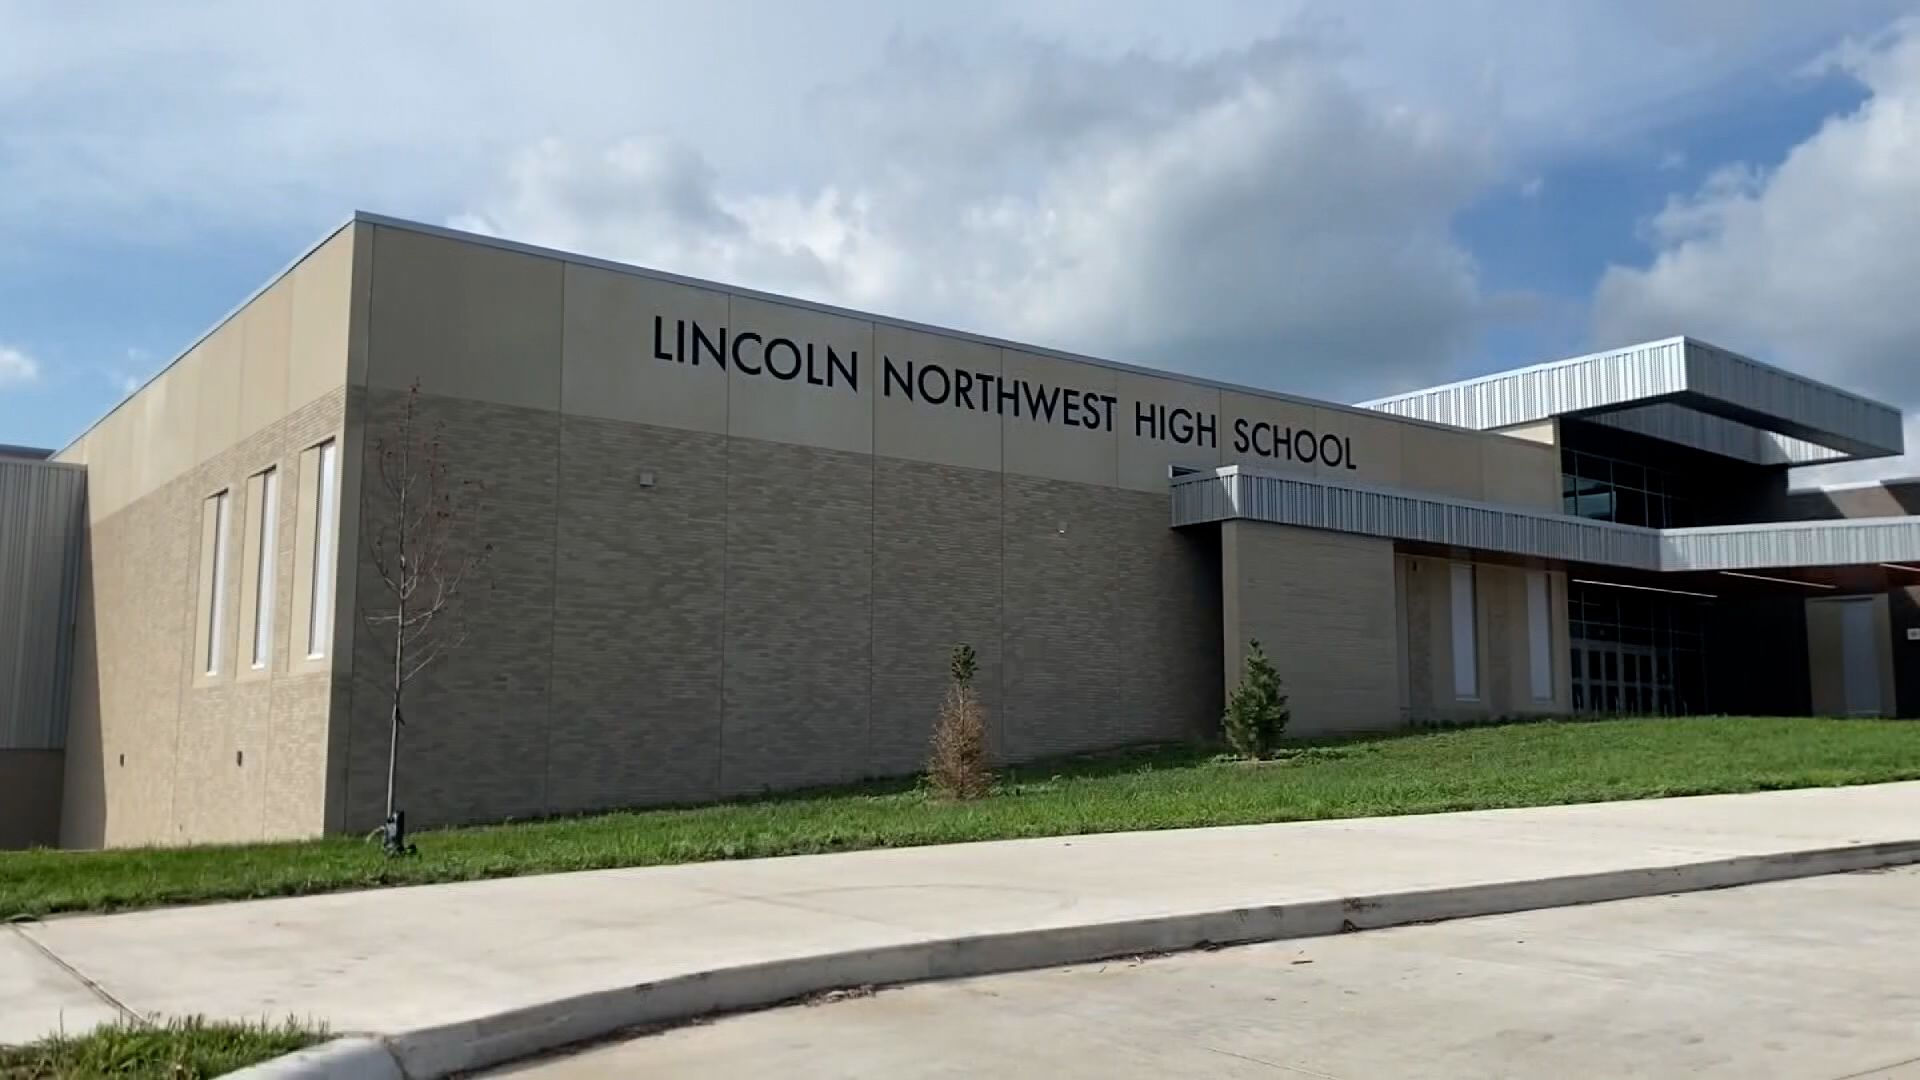 Lincoln, Nebraska arrest: 26-year-old allegedly enrolled in high school and  sent sexually explicit text messages to underage students, police say | CNN